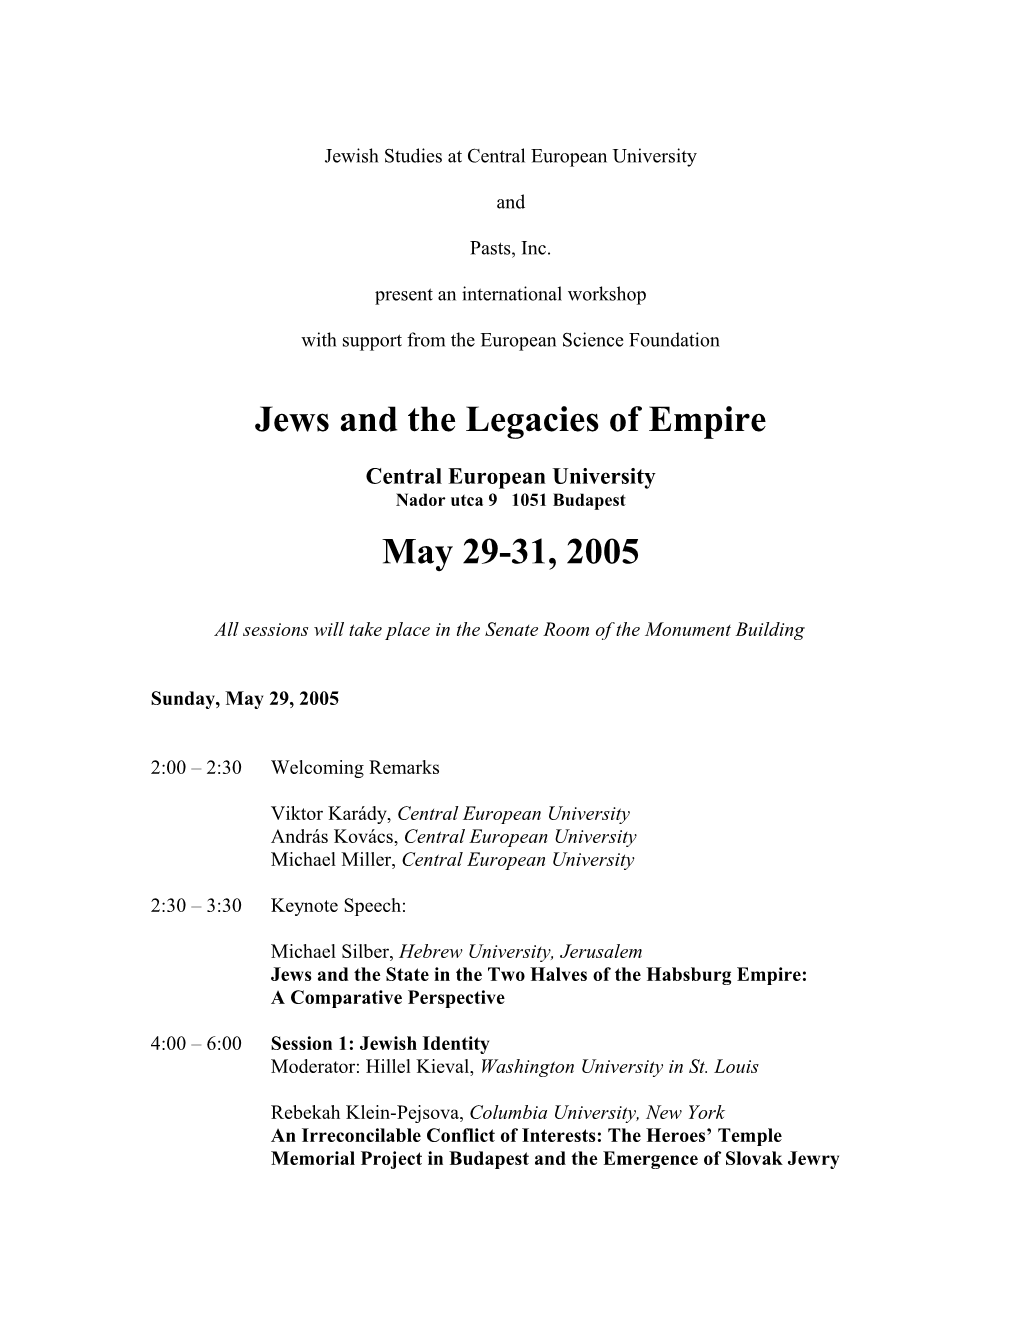 Jews and the Legacies of Empire